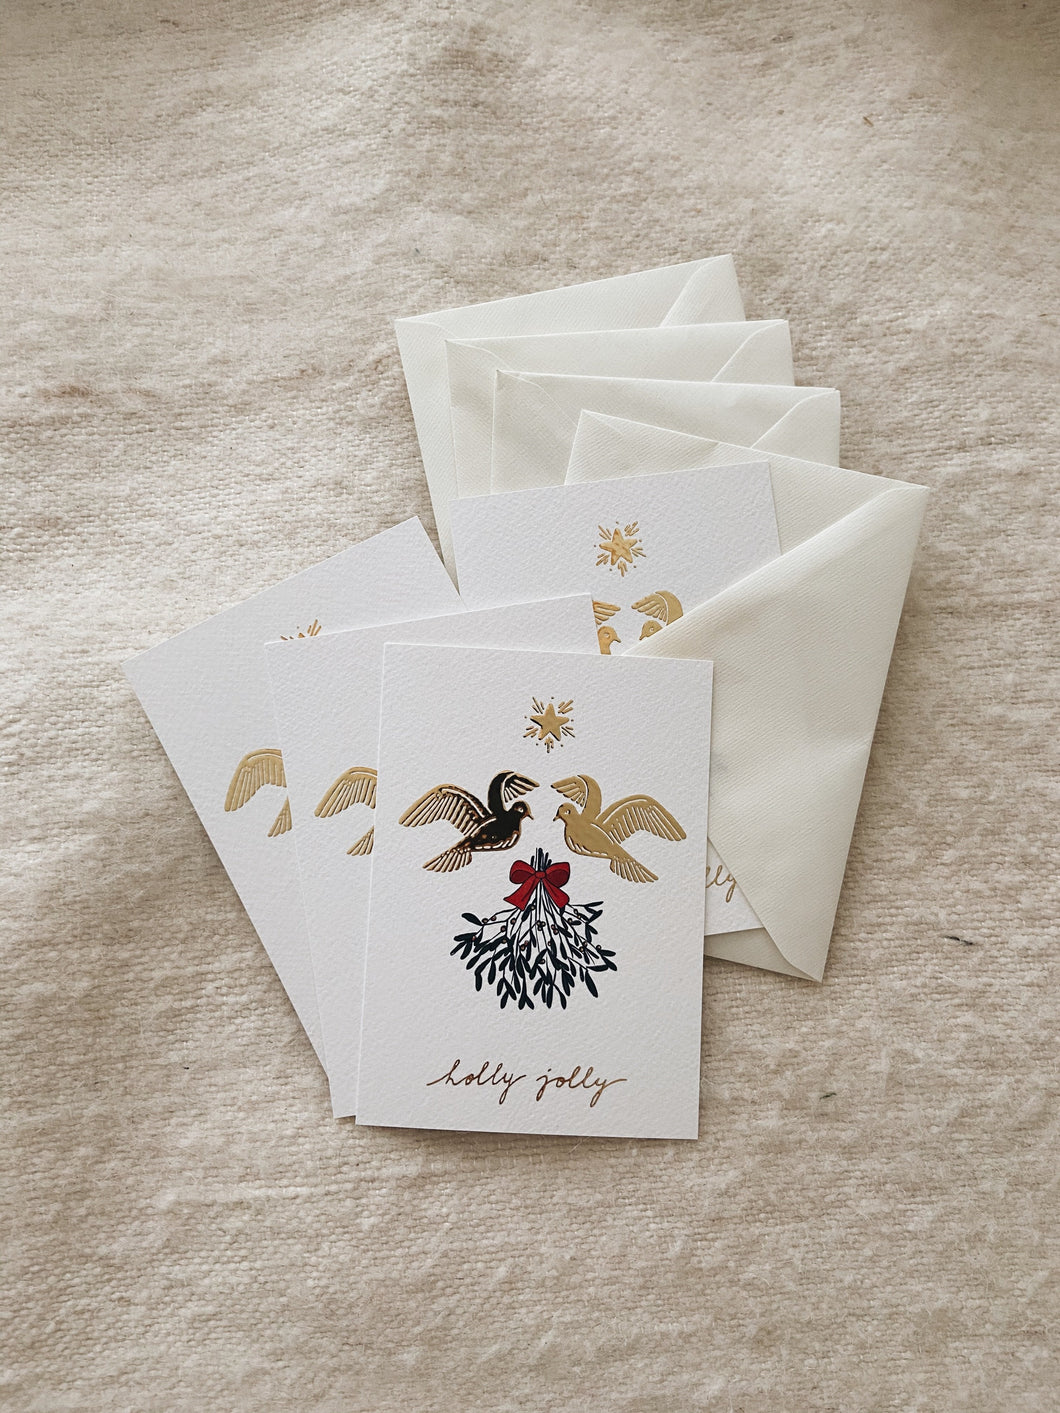 Set of 4 Christmas Cards - Holly Jolly